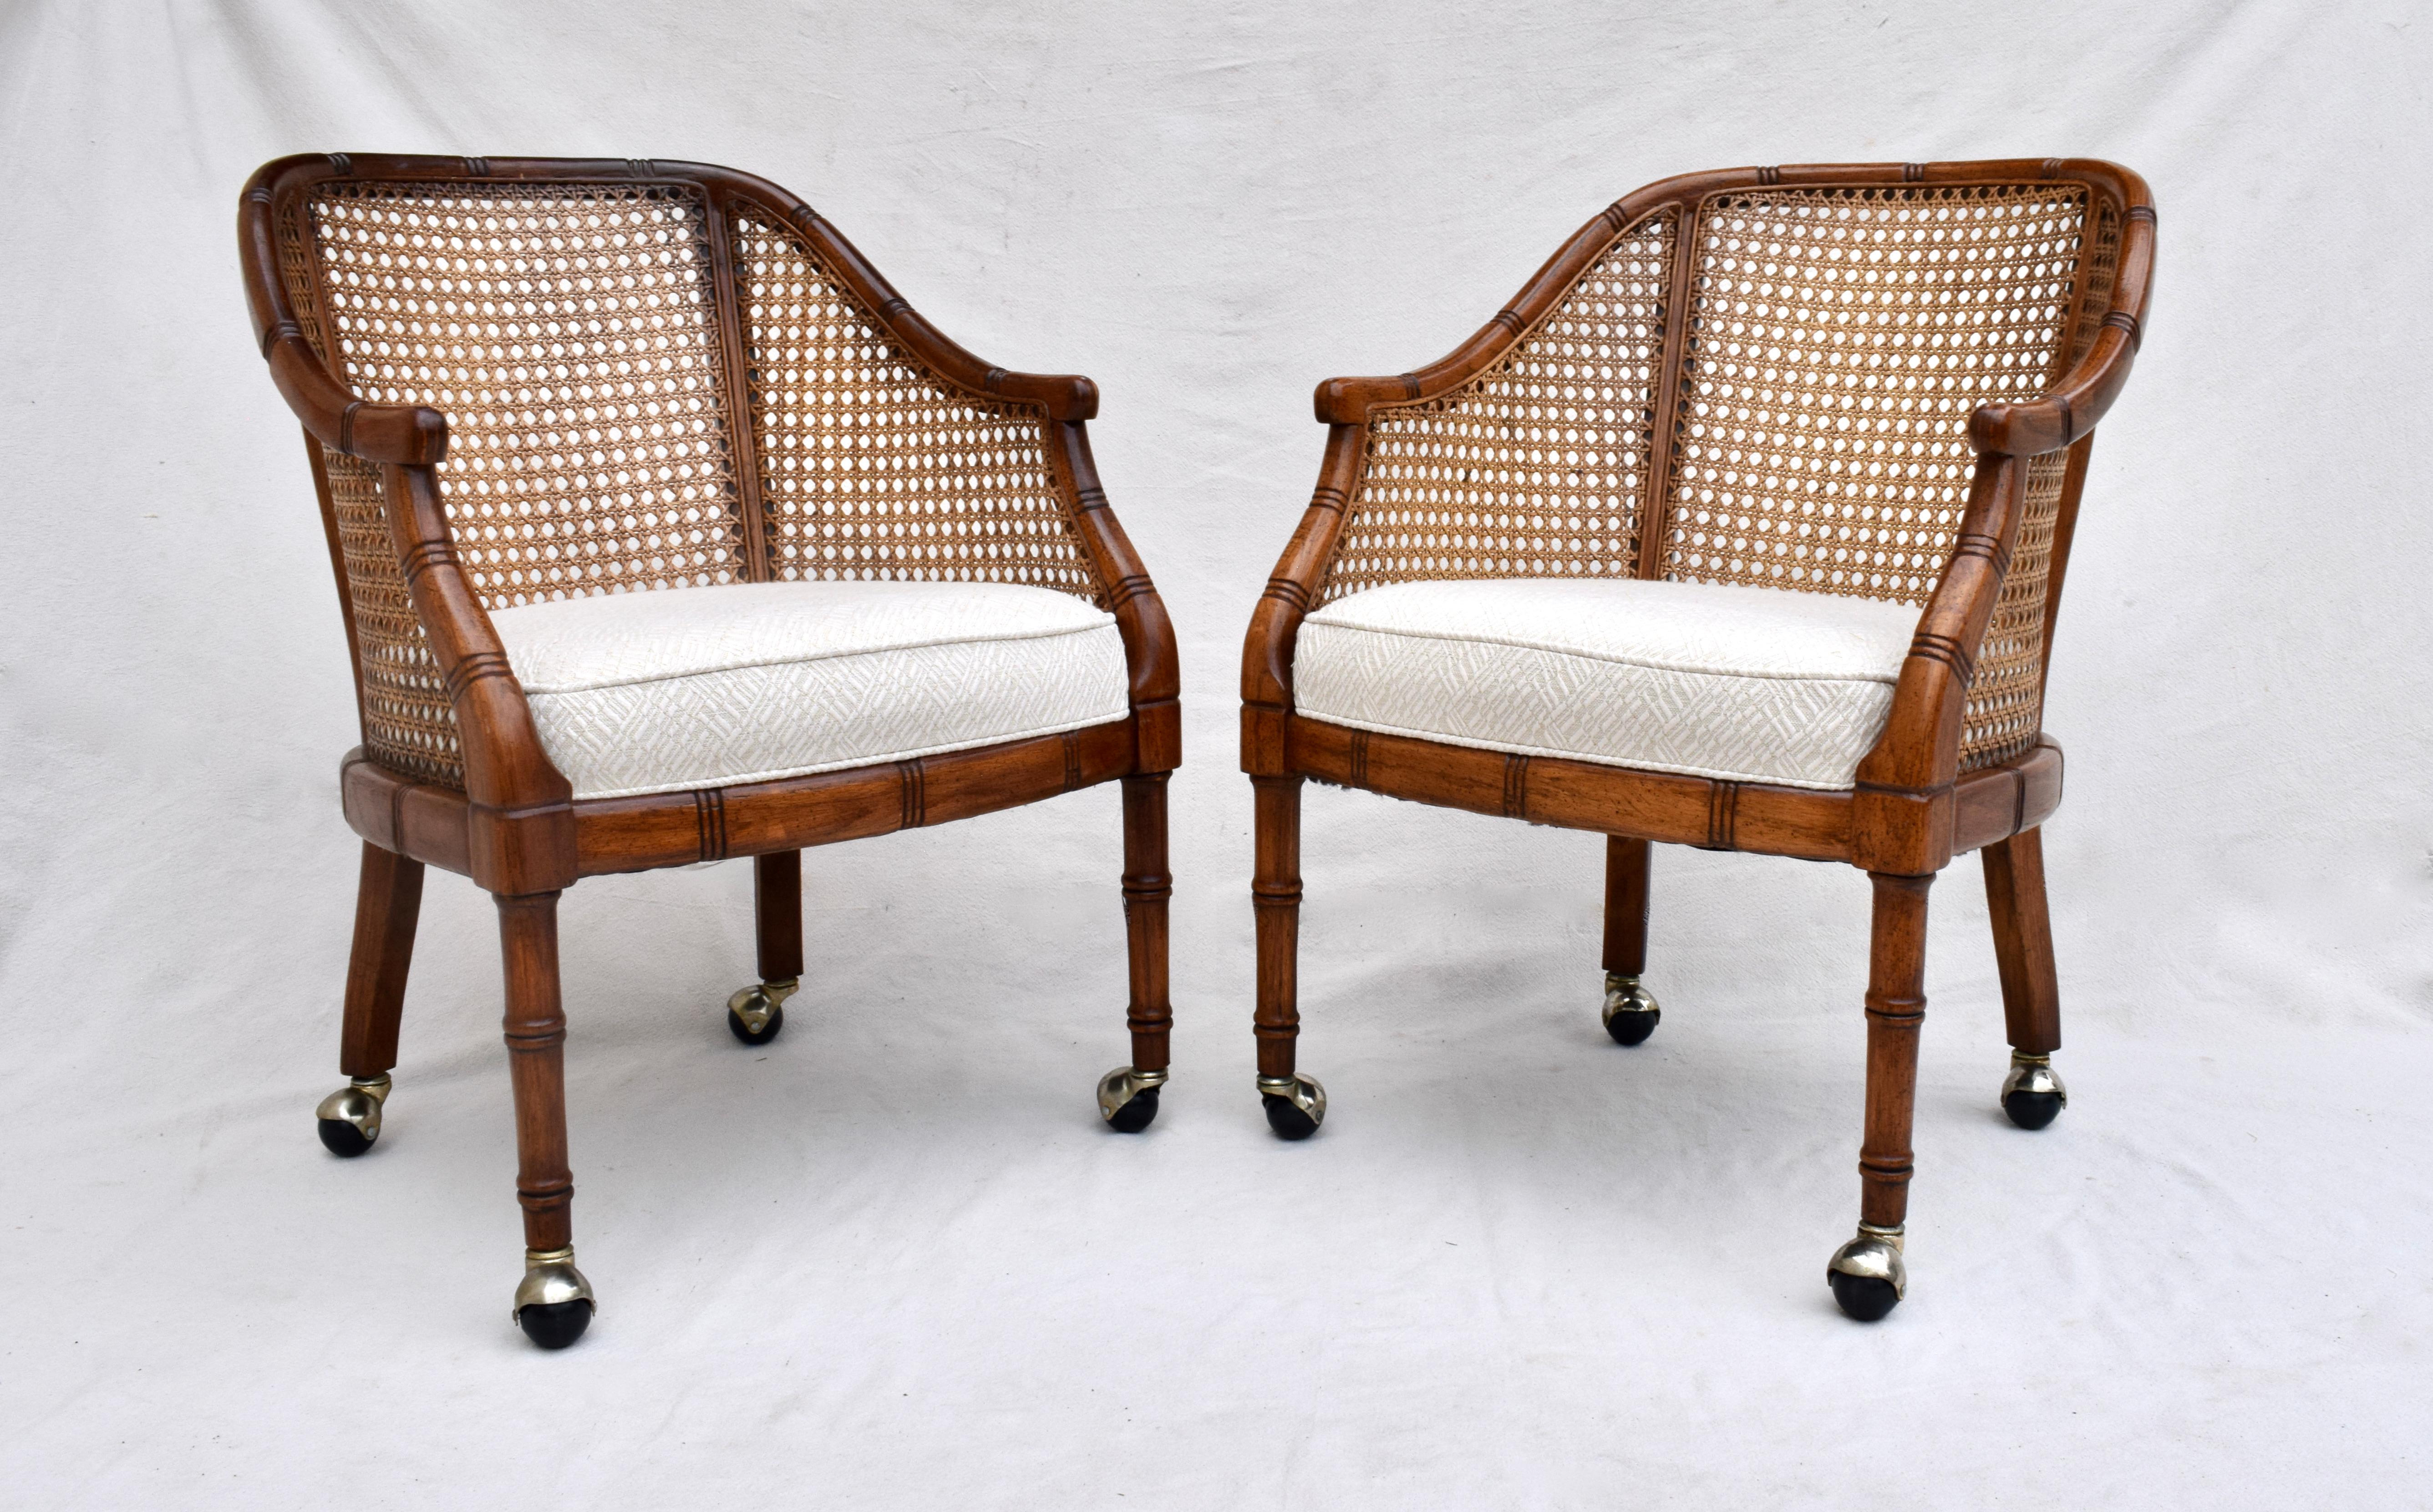 Fabric Pair of Caned Barrel Chairs on Casters